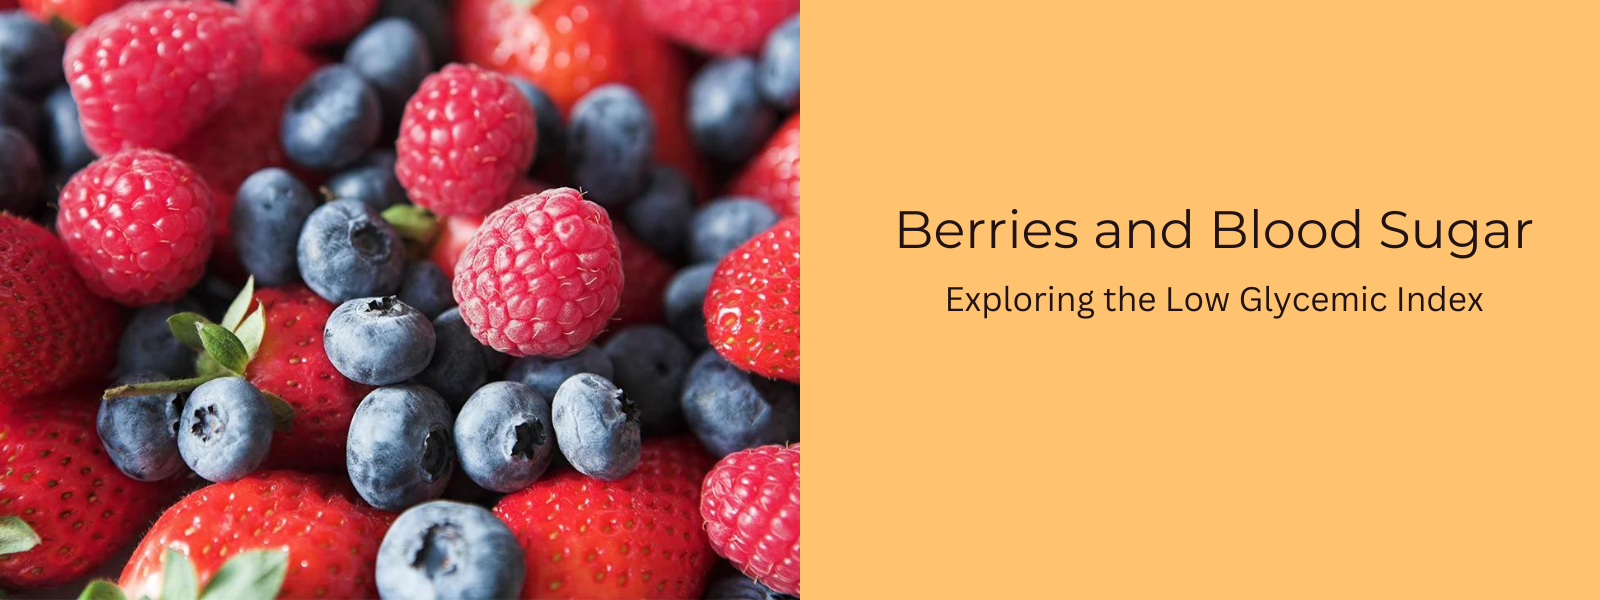 Berries and Blood Sugar: Exploring the Low Glycemic Index